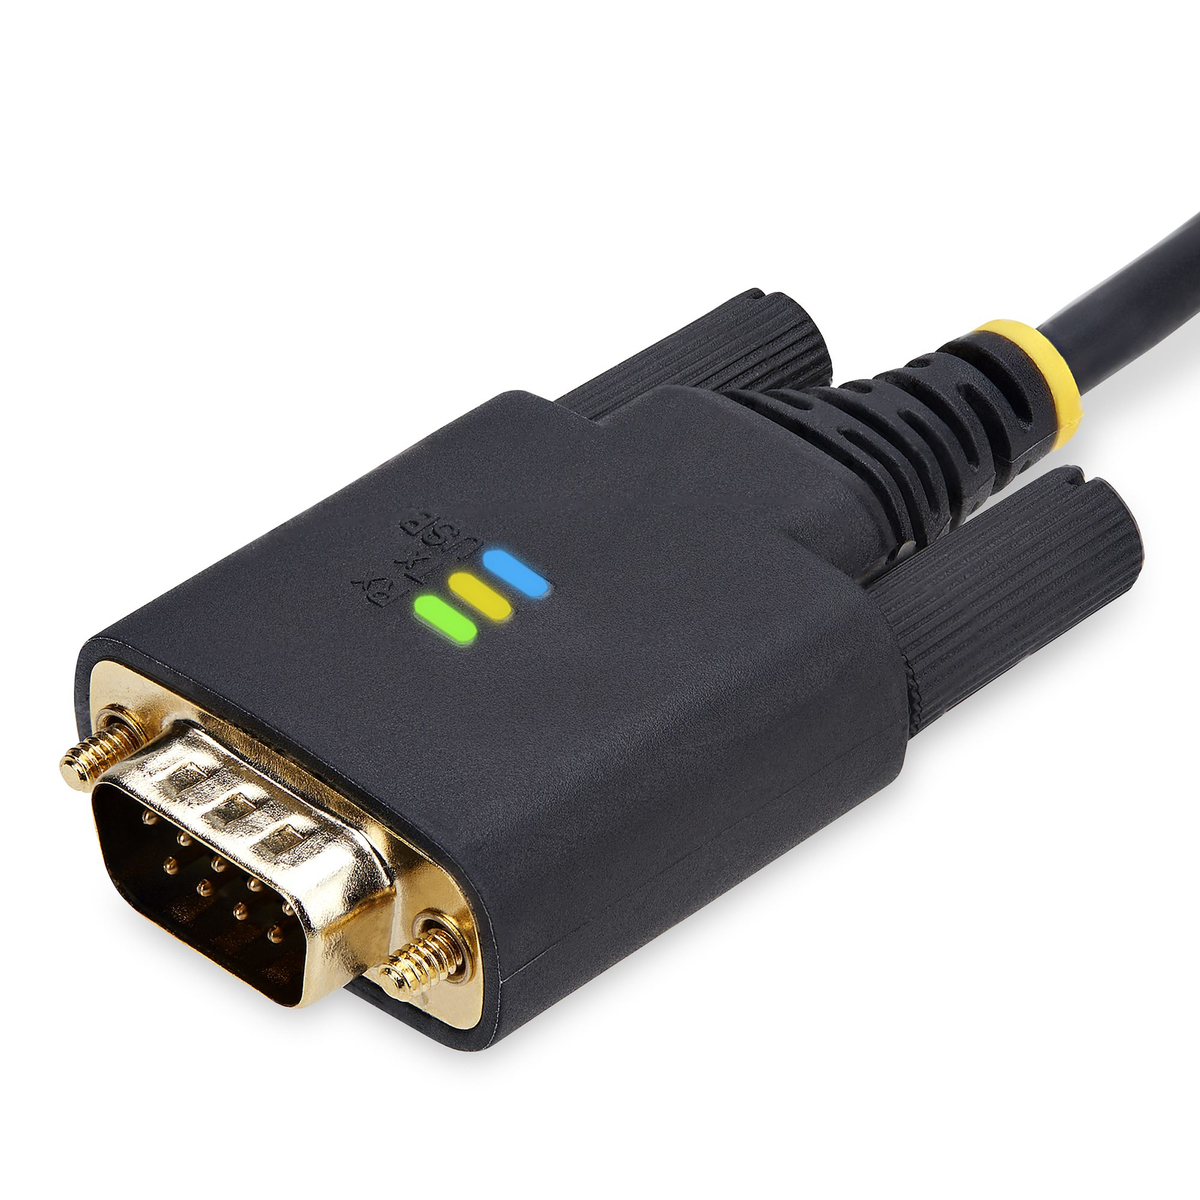 10ft/3m USB to Null Modem Serial Cable